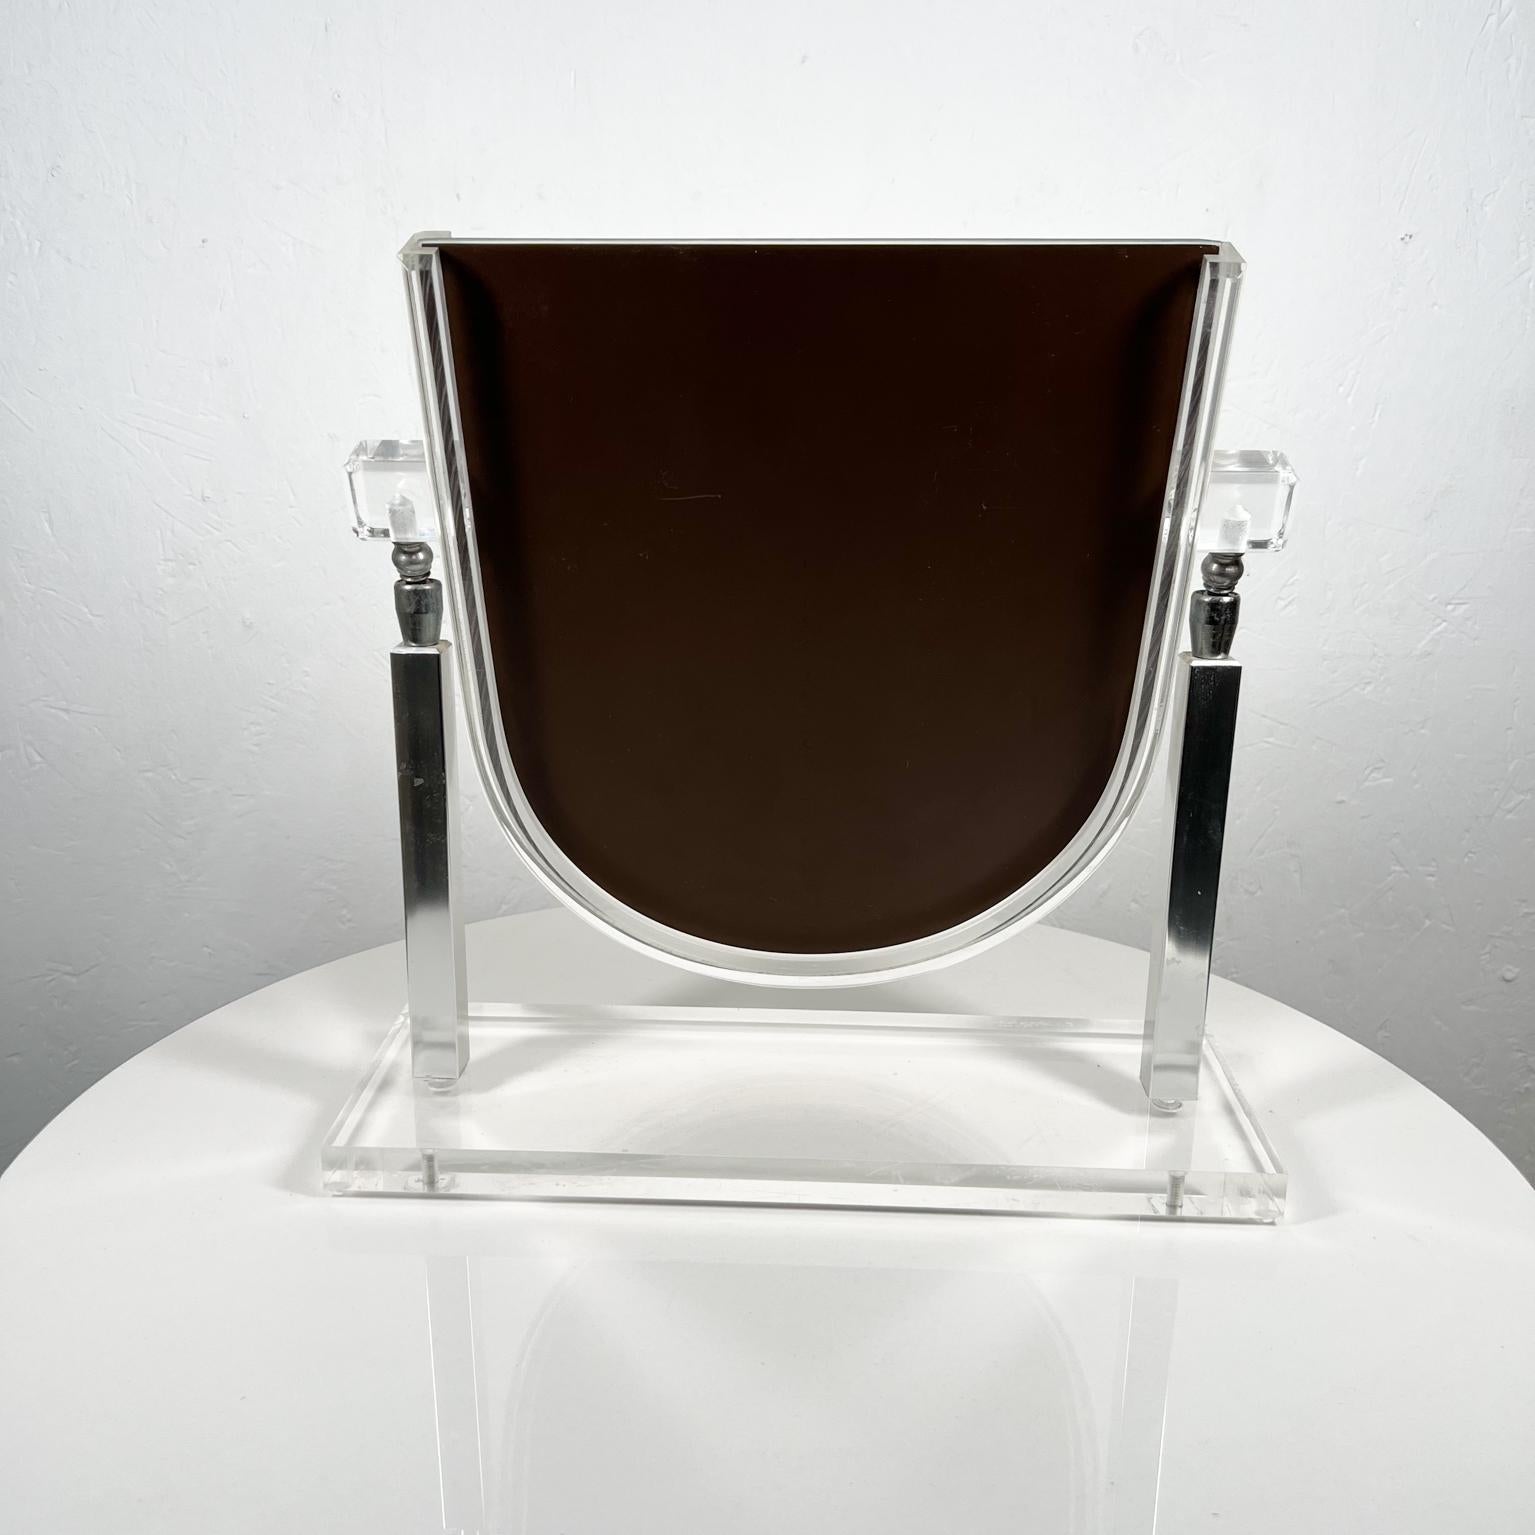 1970s Modernist Lucite Chrome Table Vanity Mirror  For Sale 3